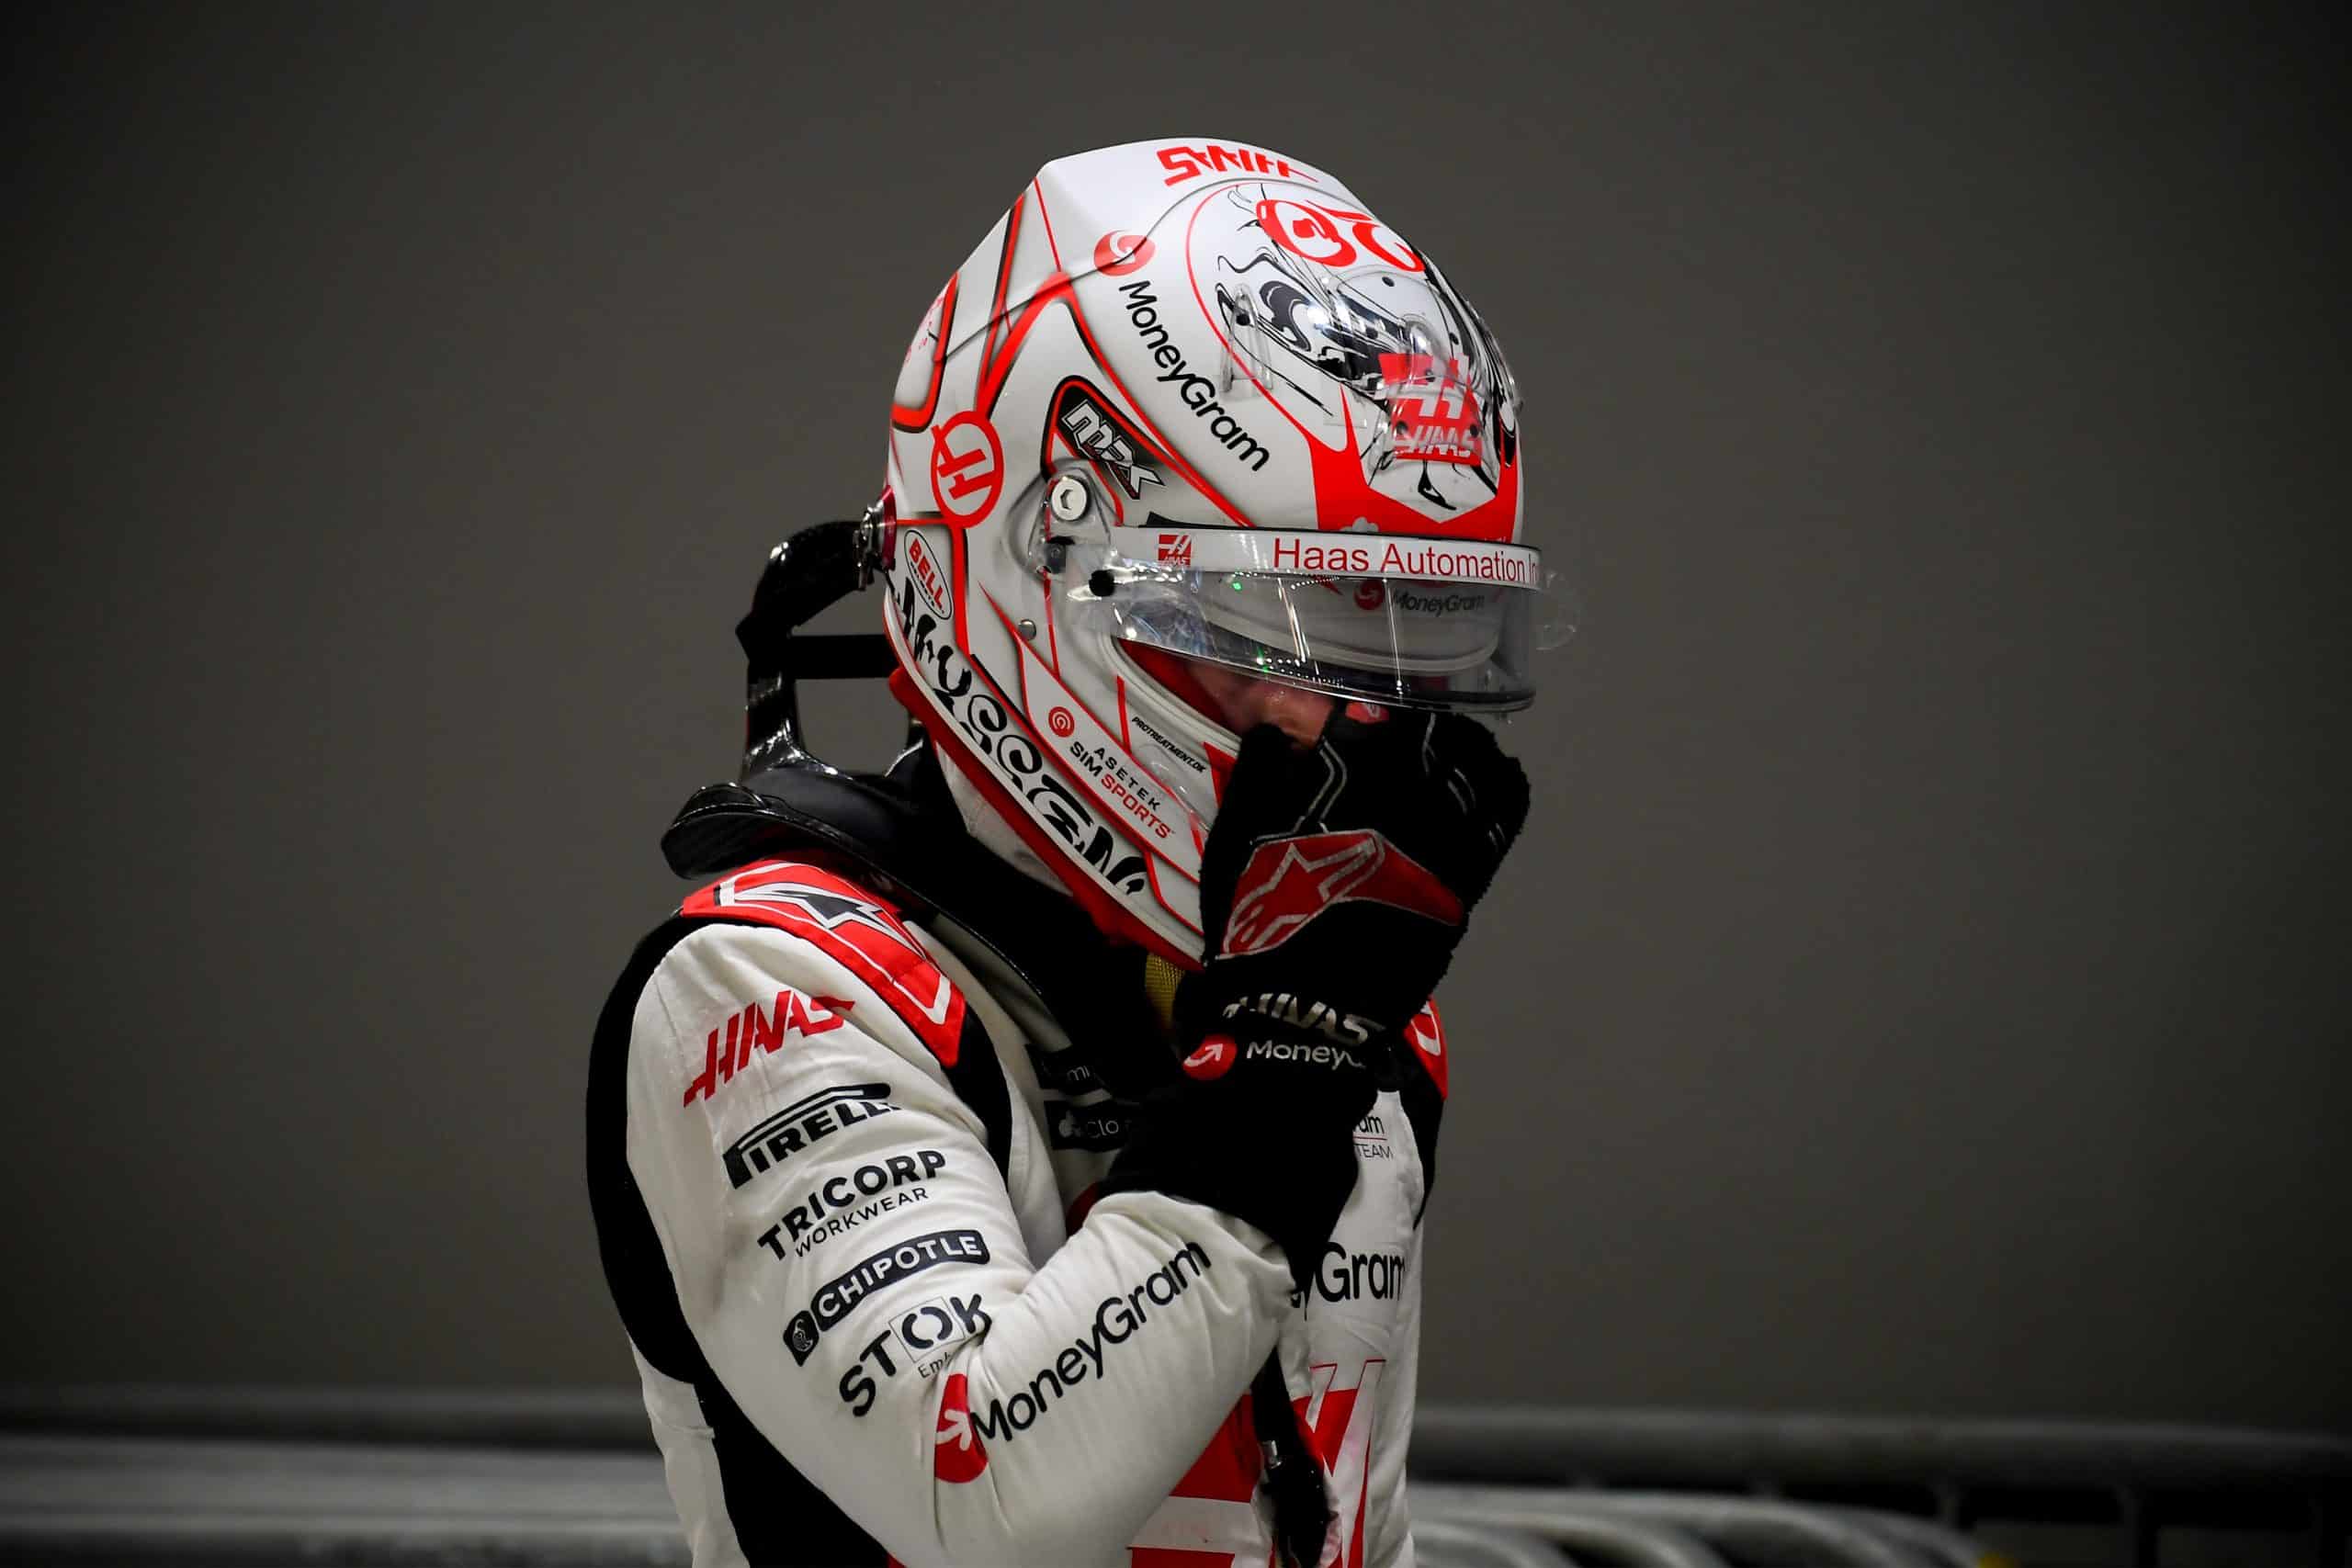 Admin by request sponsored kevin magnussen (haas-ferrari) after qualifying for the 2023 singapore grand prix in marina bay » admin by request » admin by request